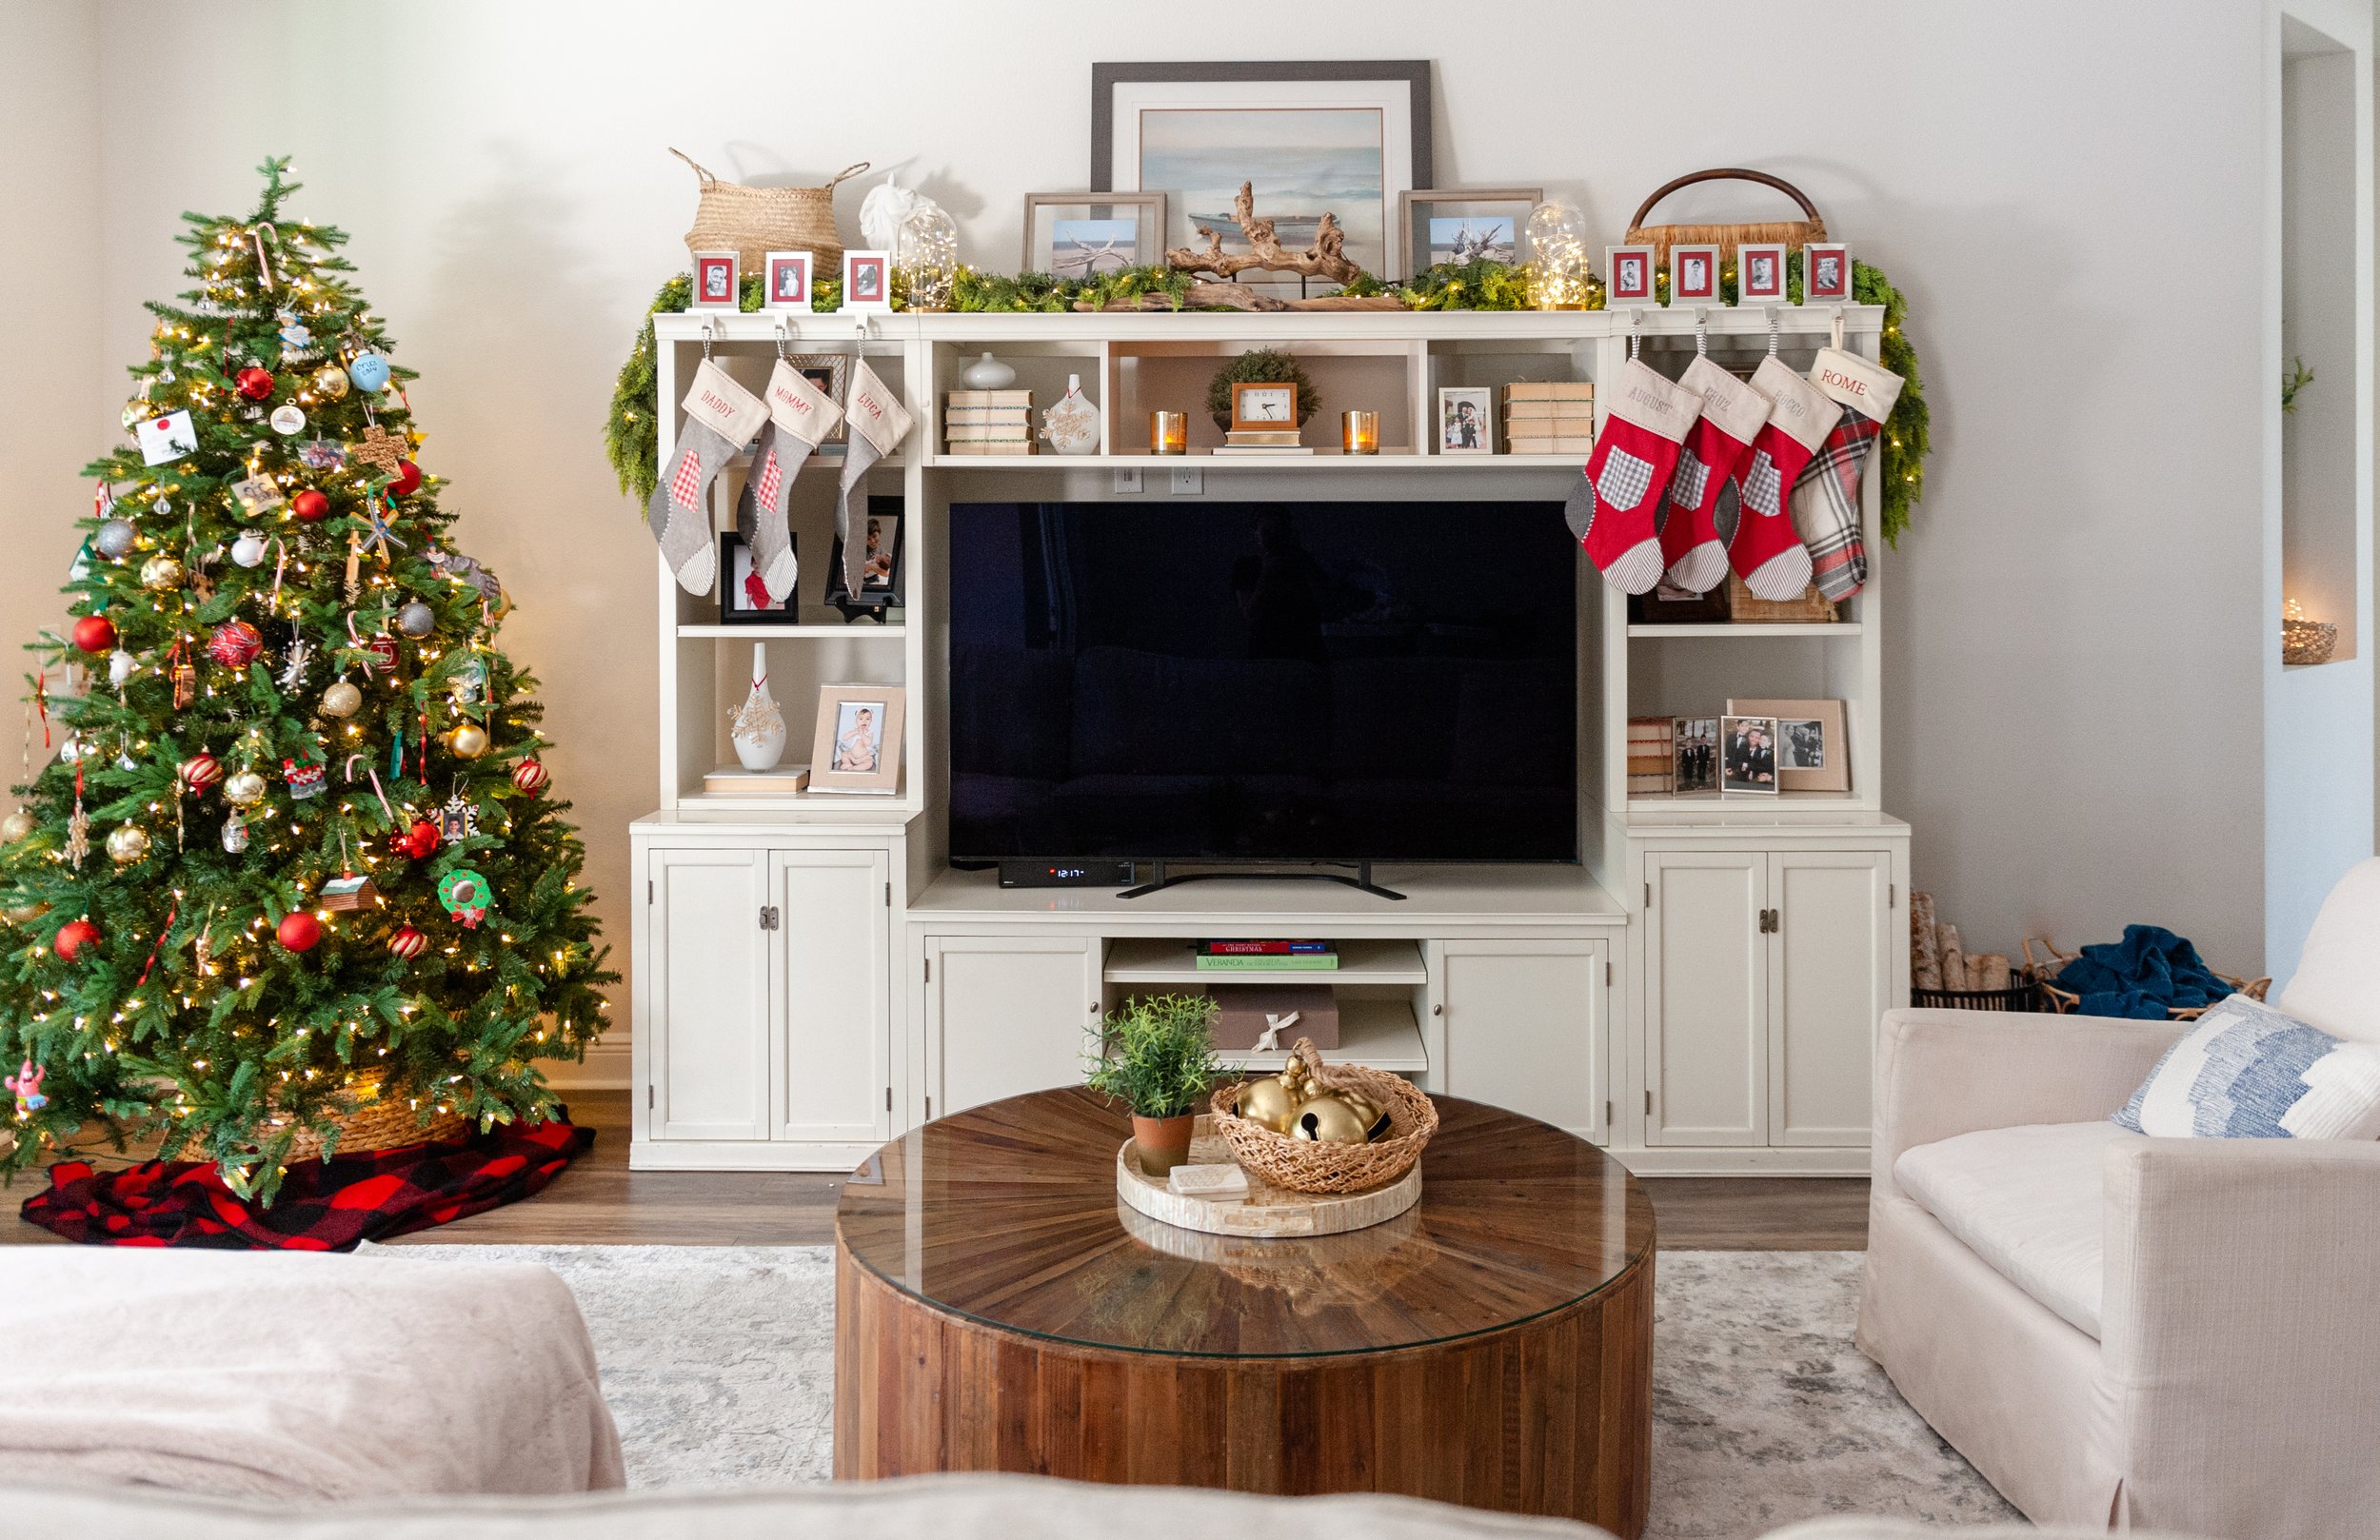 Pottery Barn's 'Elf' Home Collection Is a Burst of Holiday Cheer